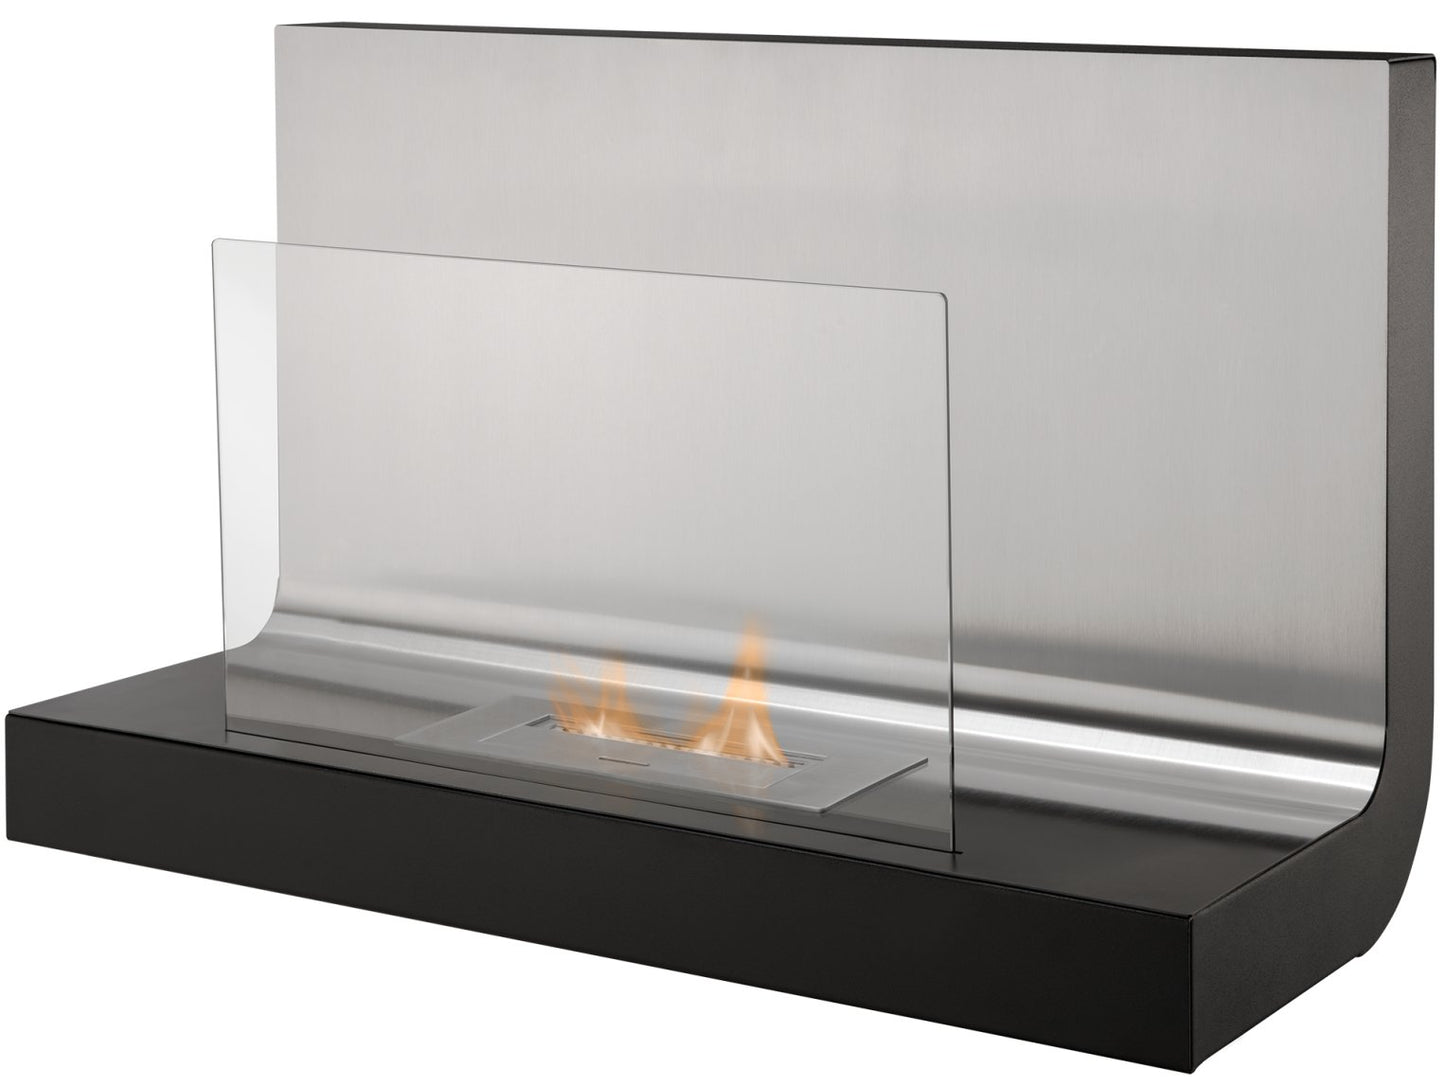 The Crescent Wall Mounted Bio Ethanol Fire in Stainless Steel, 31 Inch